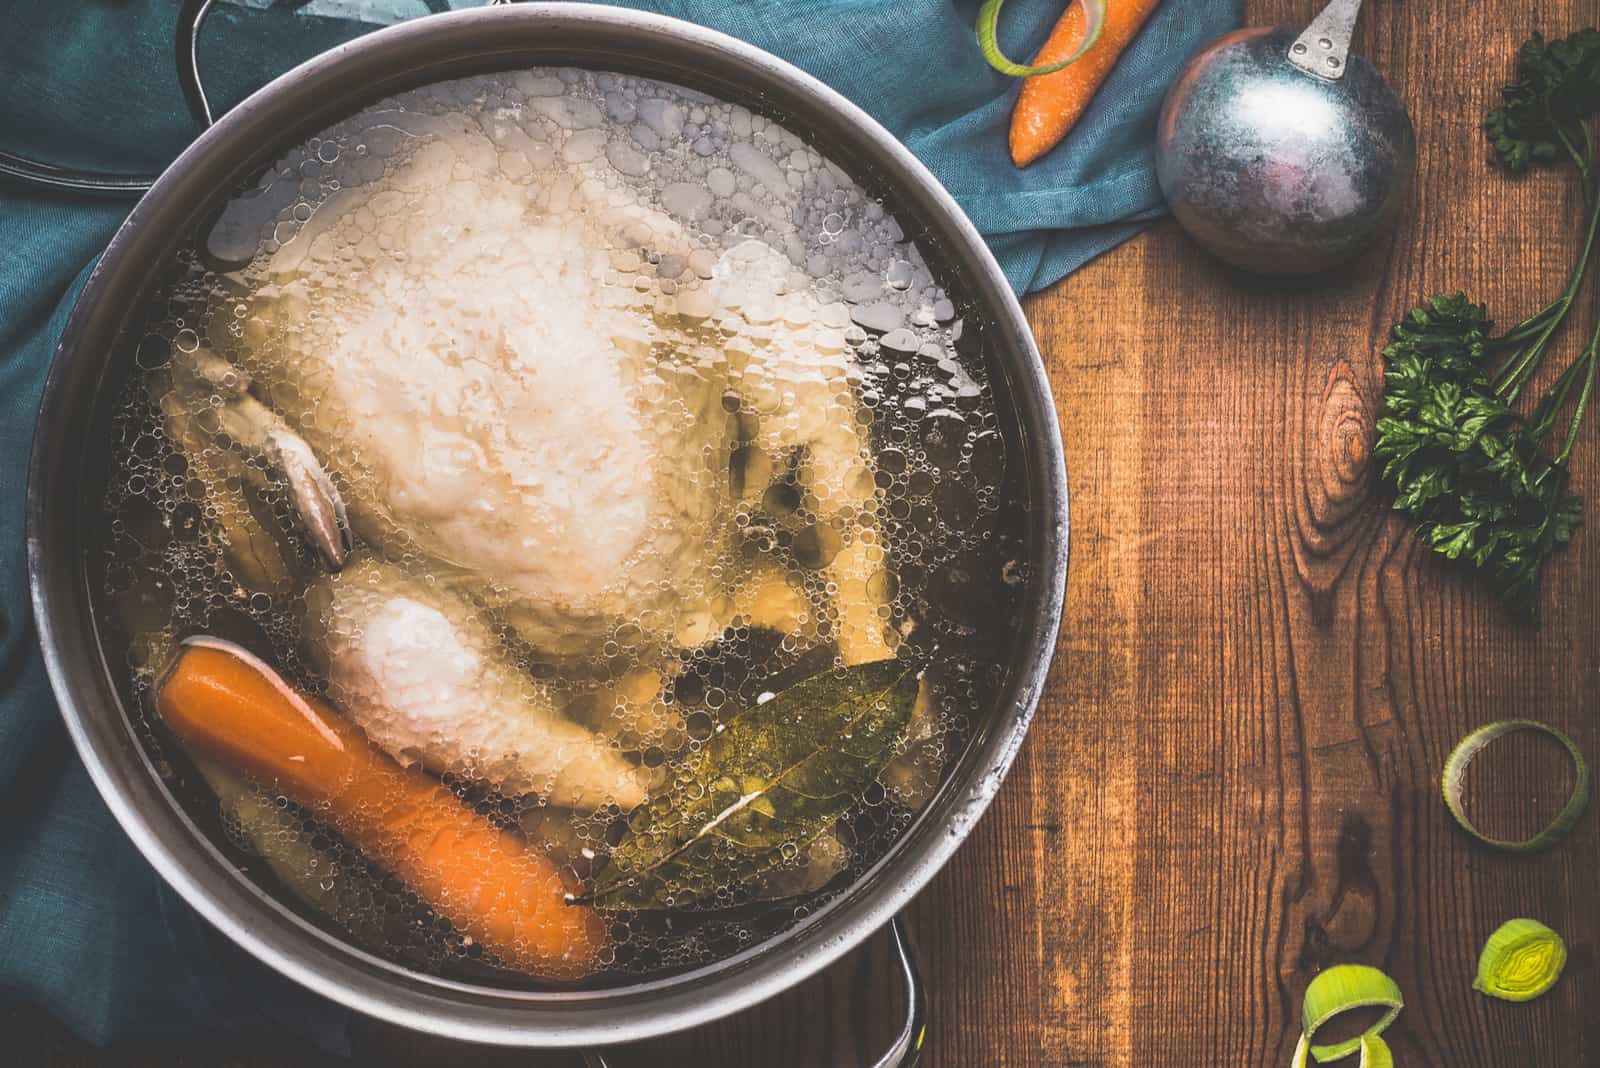 How To Boil Chicken For Dogs: Everything You Need To Know